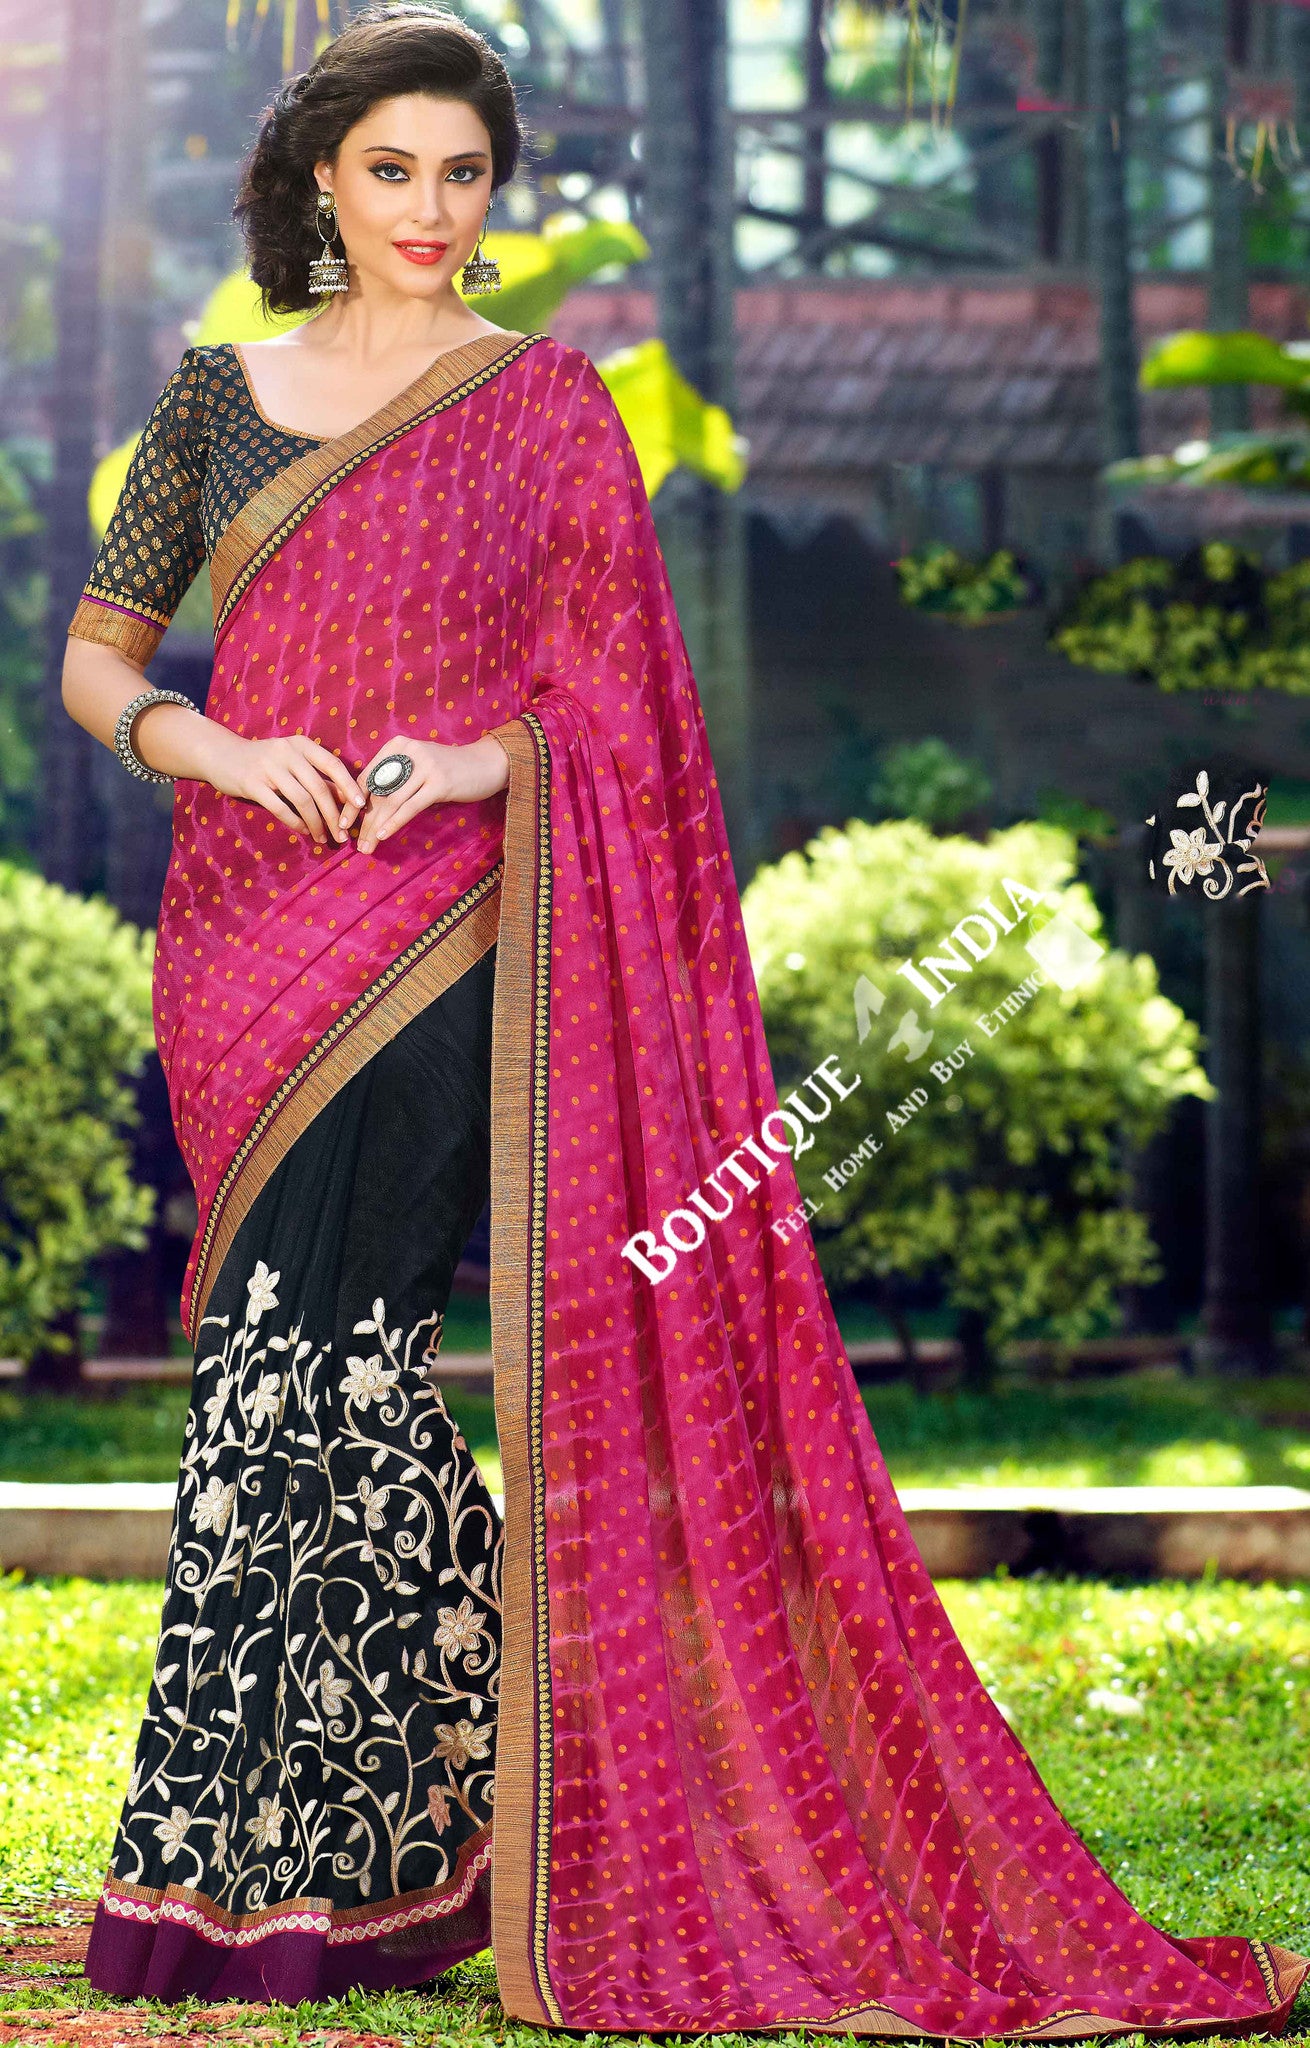 Net Faux Chiffon Saree - Silky Hot Pink and Golden - Boutique4India Inc.